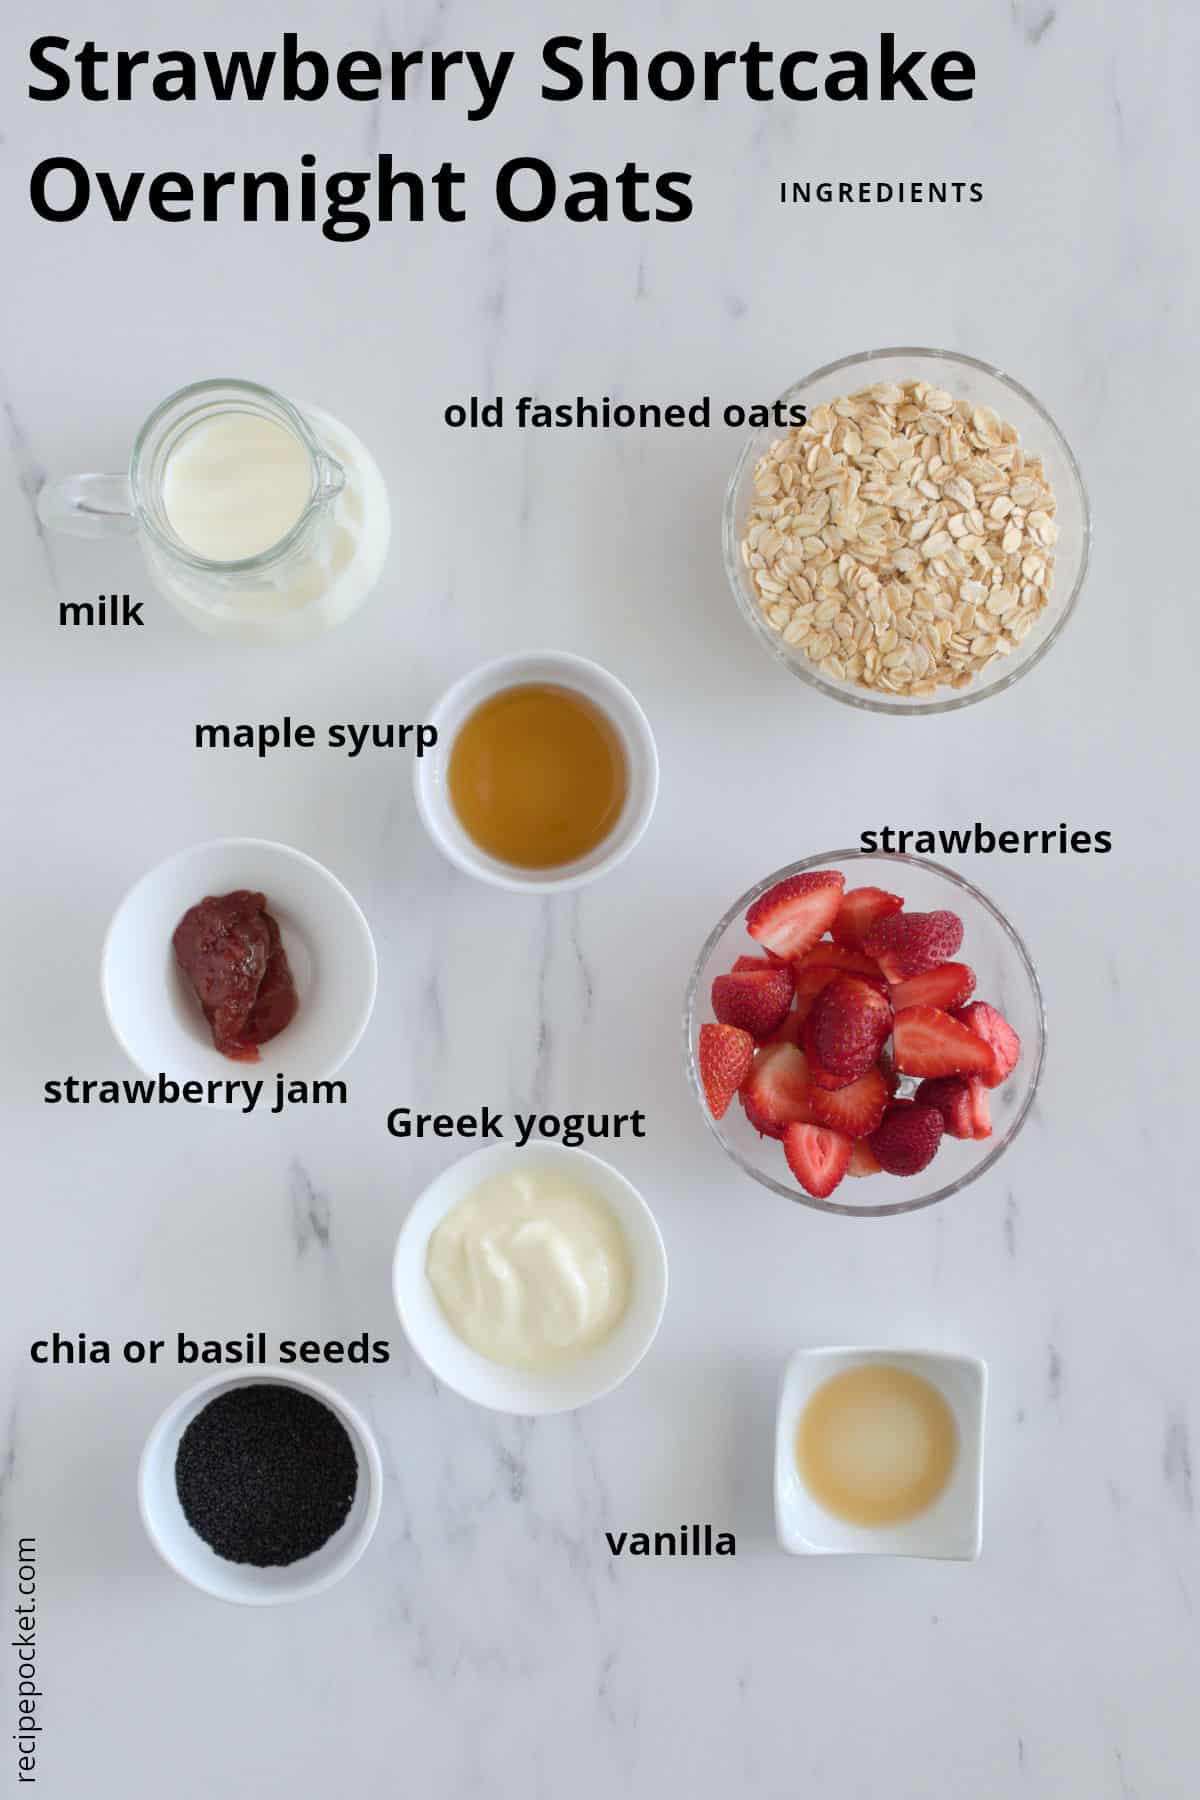 Ingredient images for strawberry shortcake overnight oats.